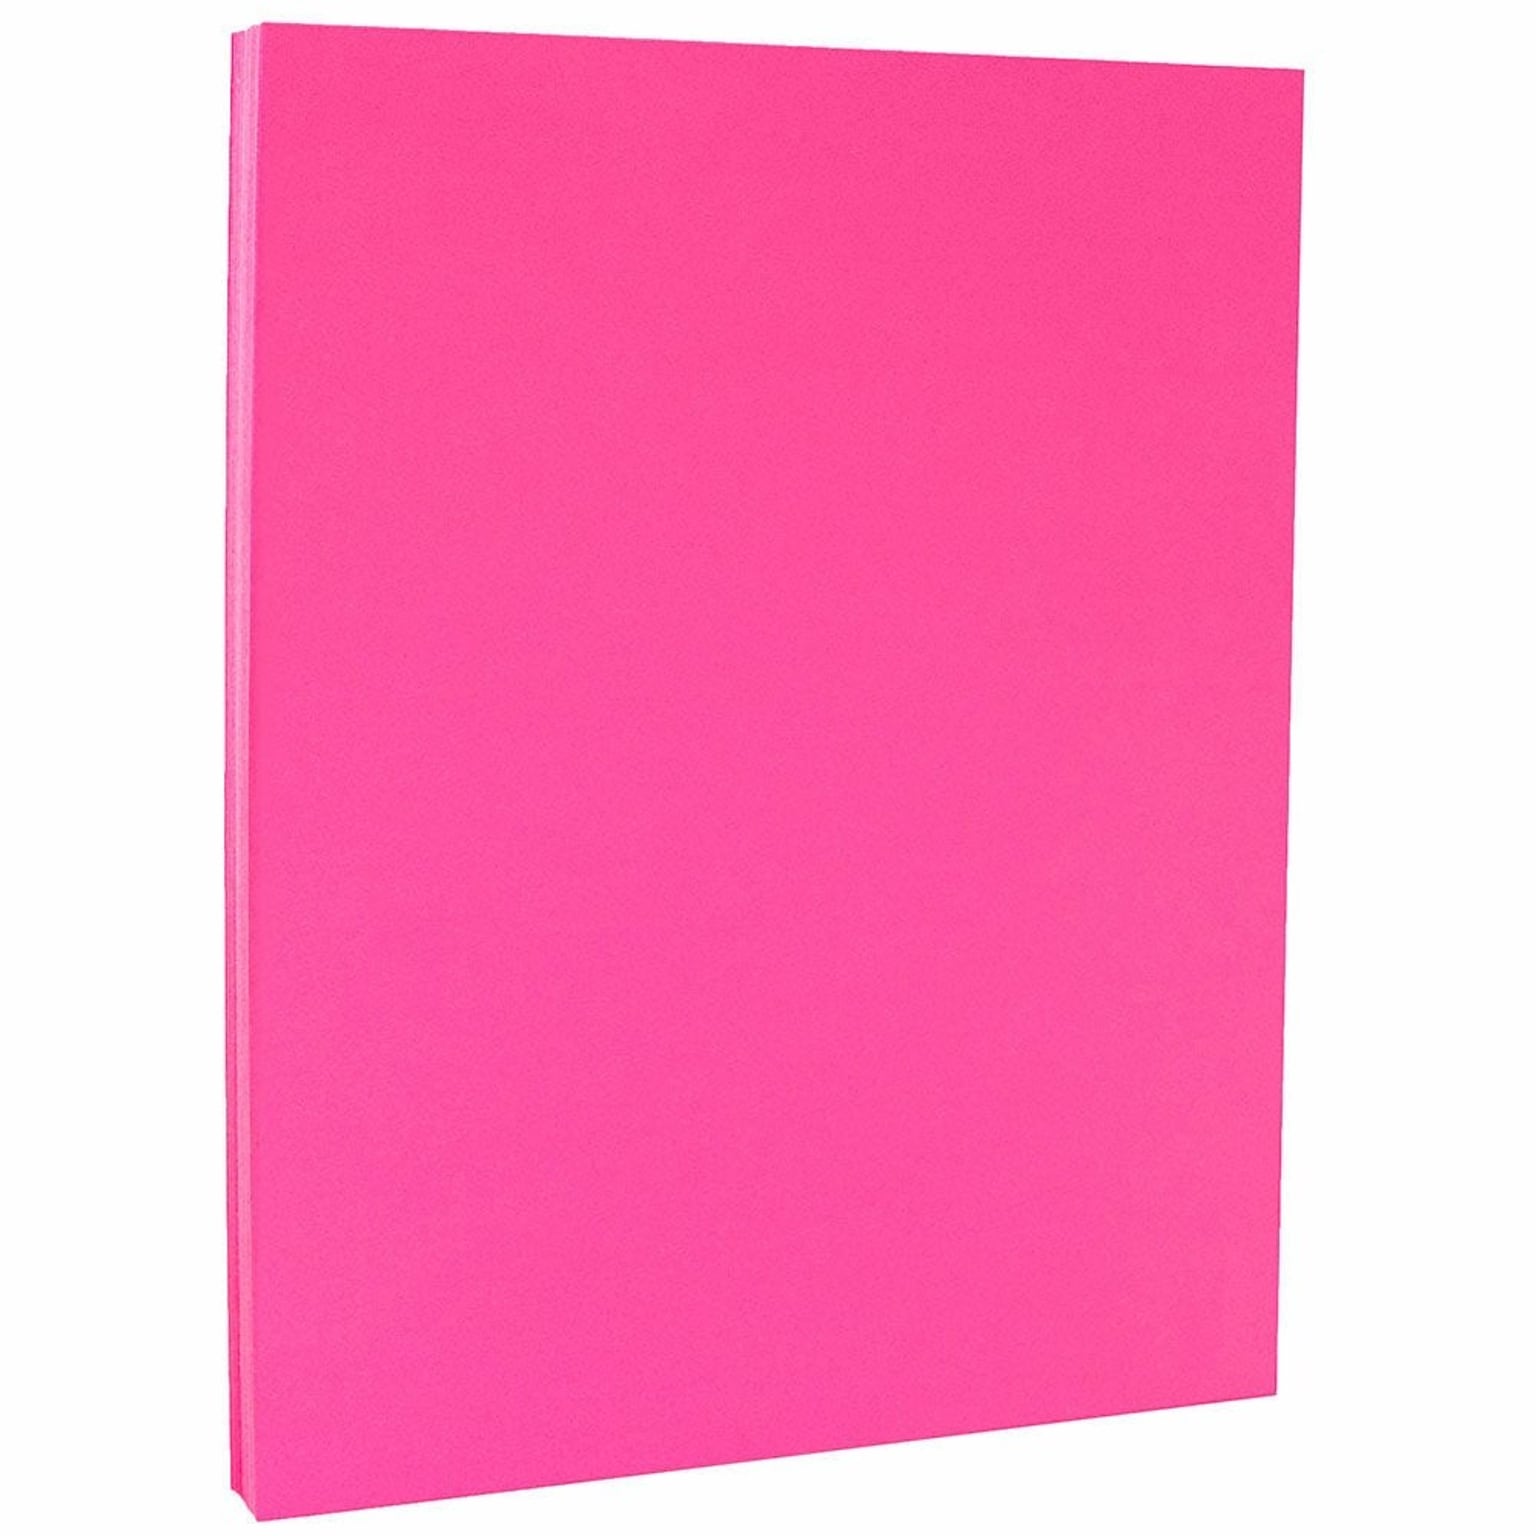 JAM PAPER 8.5 x 11 Color Cardstock, 65lb, Ultra Fuchsia, 100 Sheets/Pack (184851G)